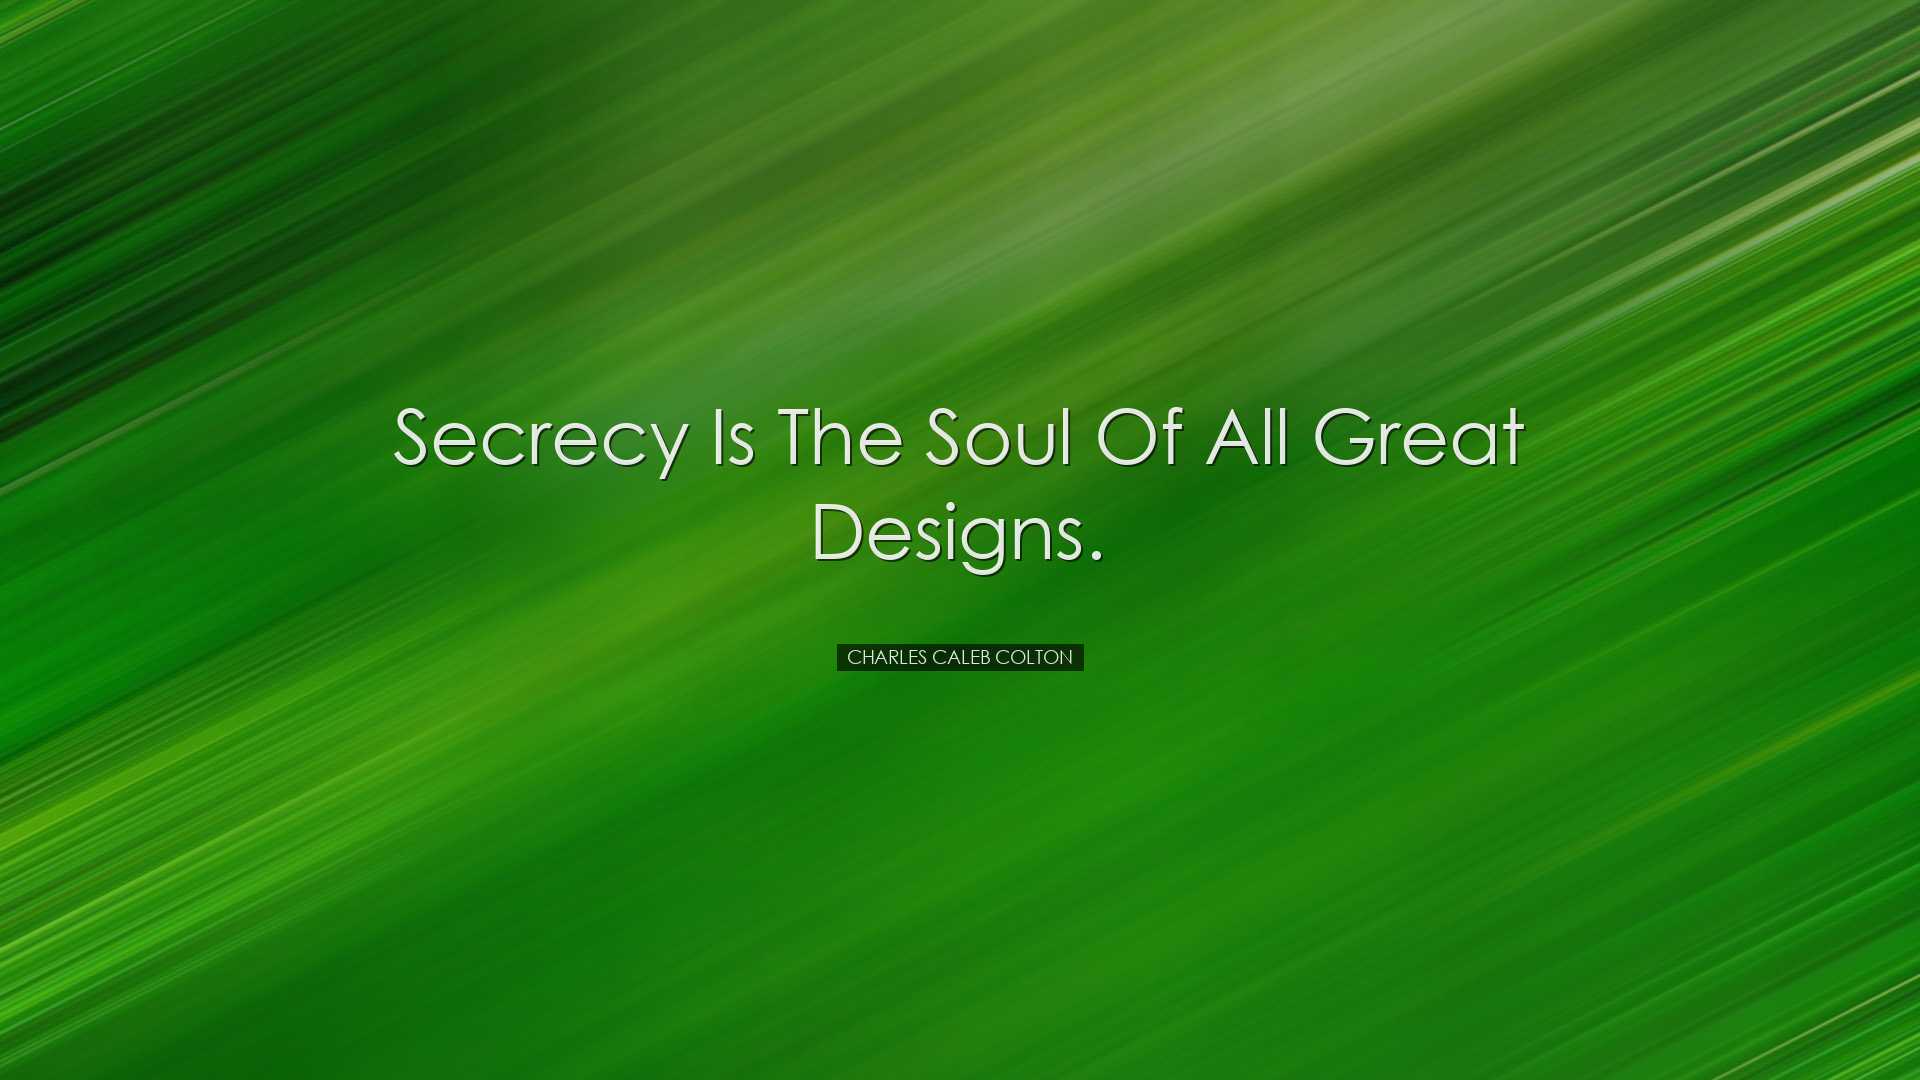 Secrecy is the soul of all great designs. - Charles Caleb Colton